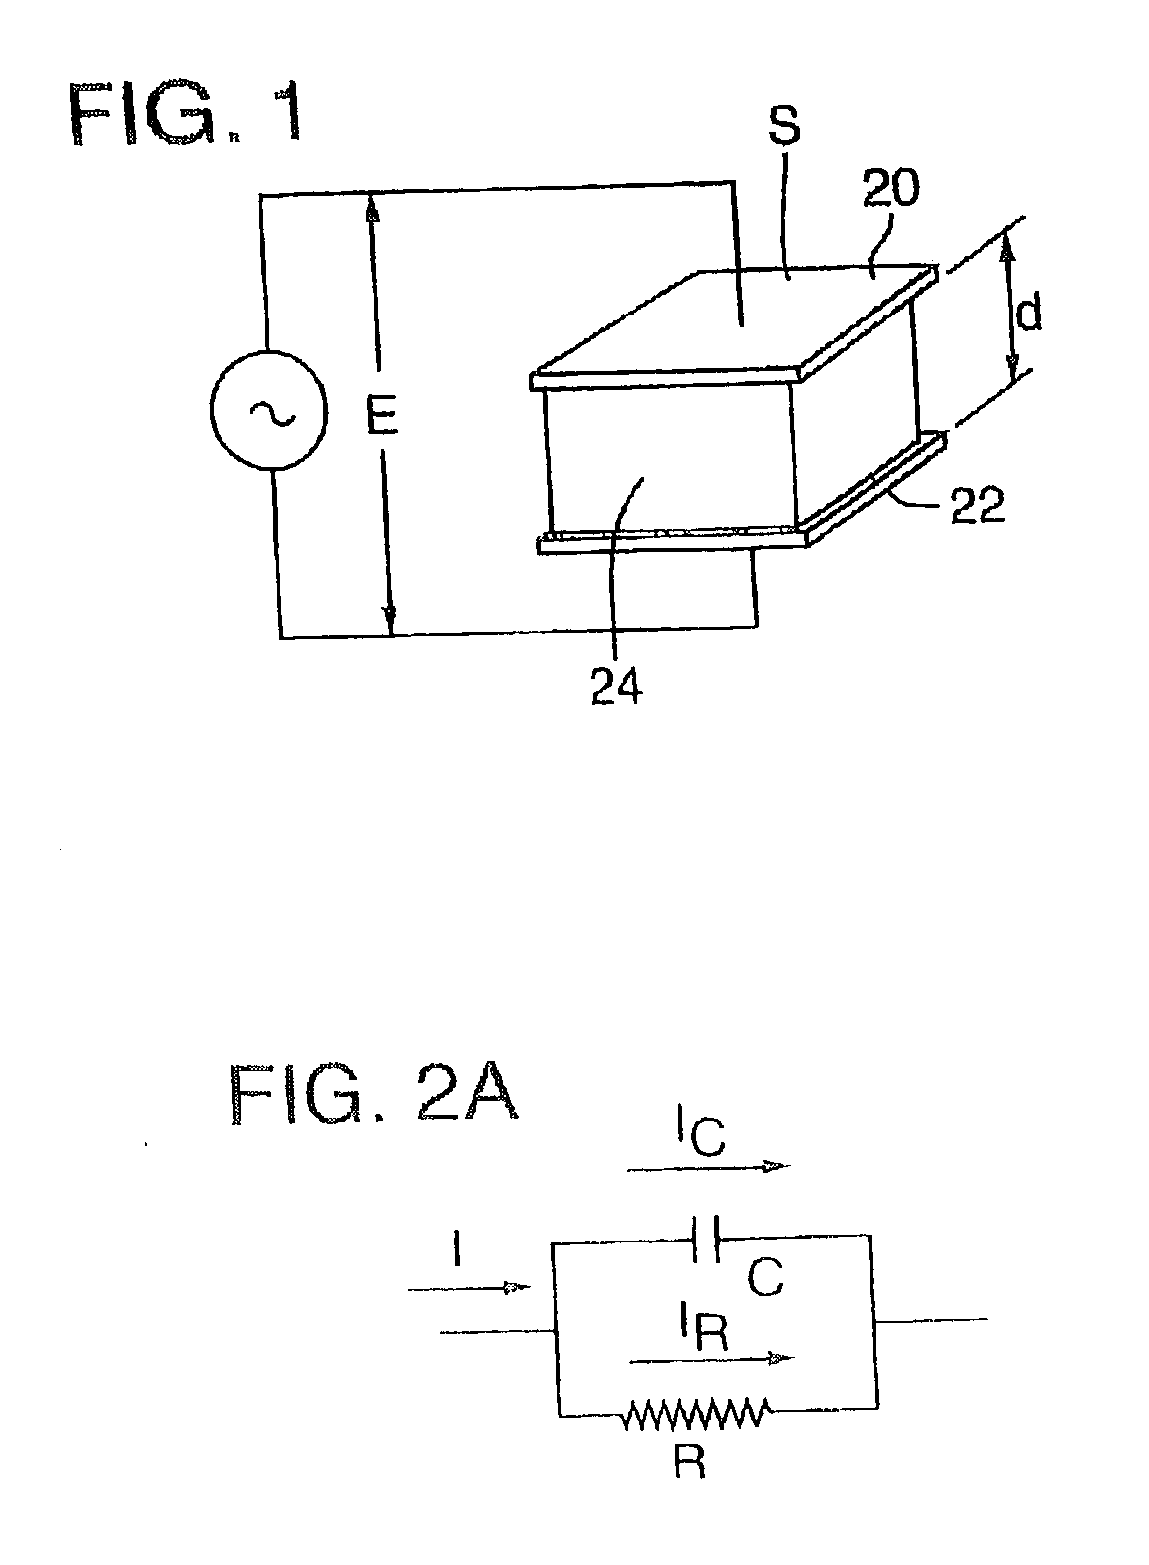 Variable frequency automated capacitive radio frequency (RF) dielectric heating system